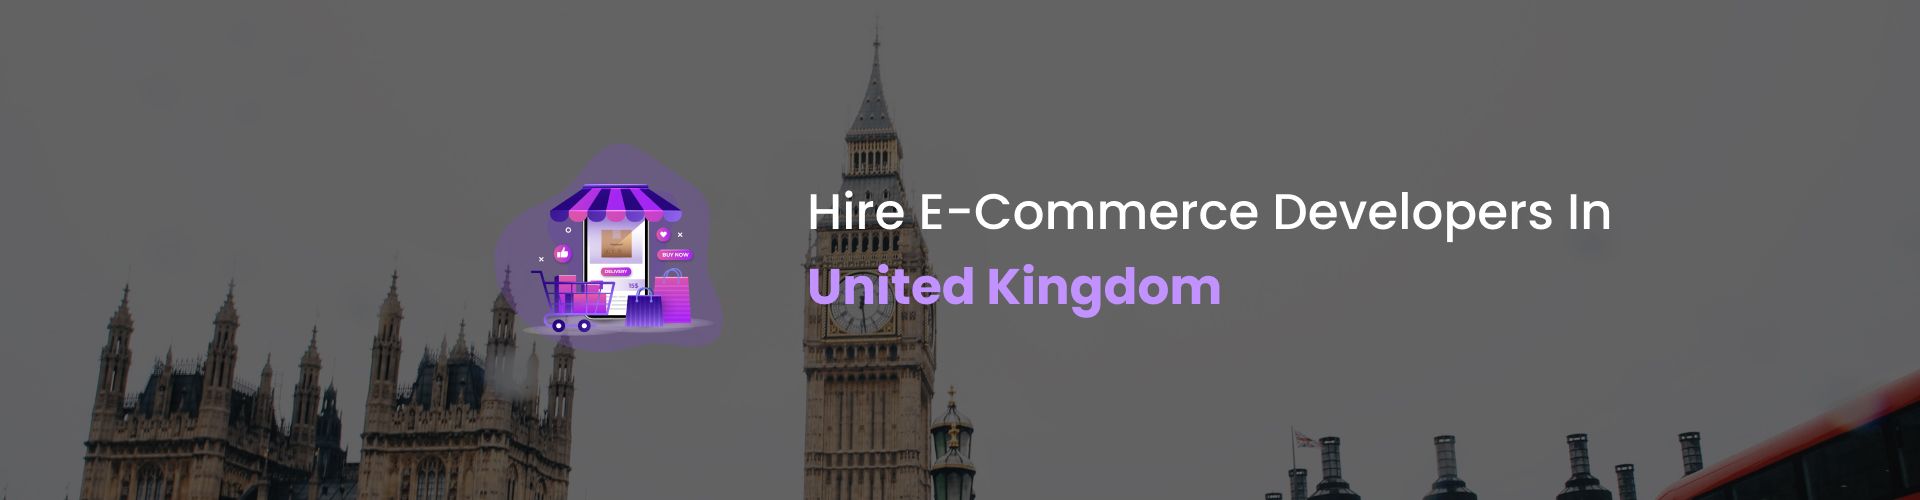 hire ecommerce developers in united kingdom